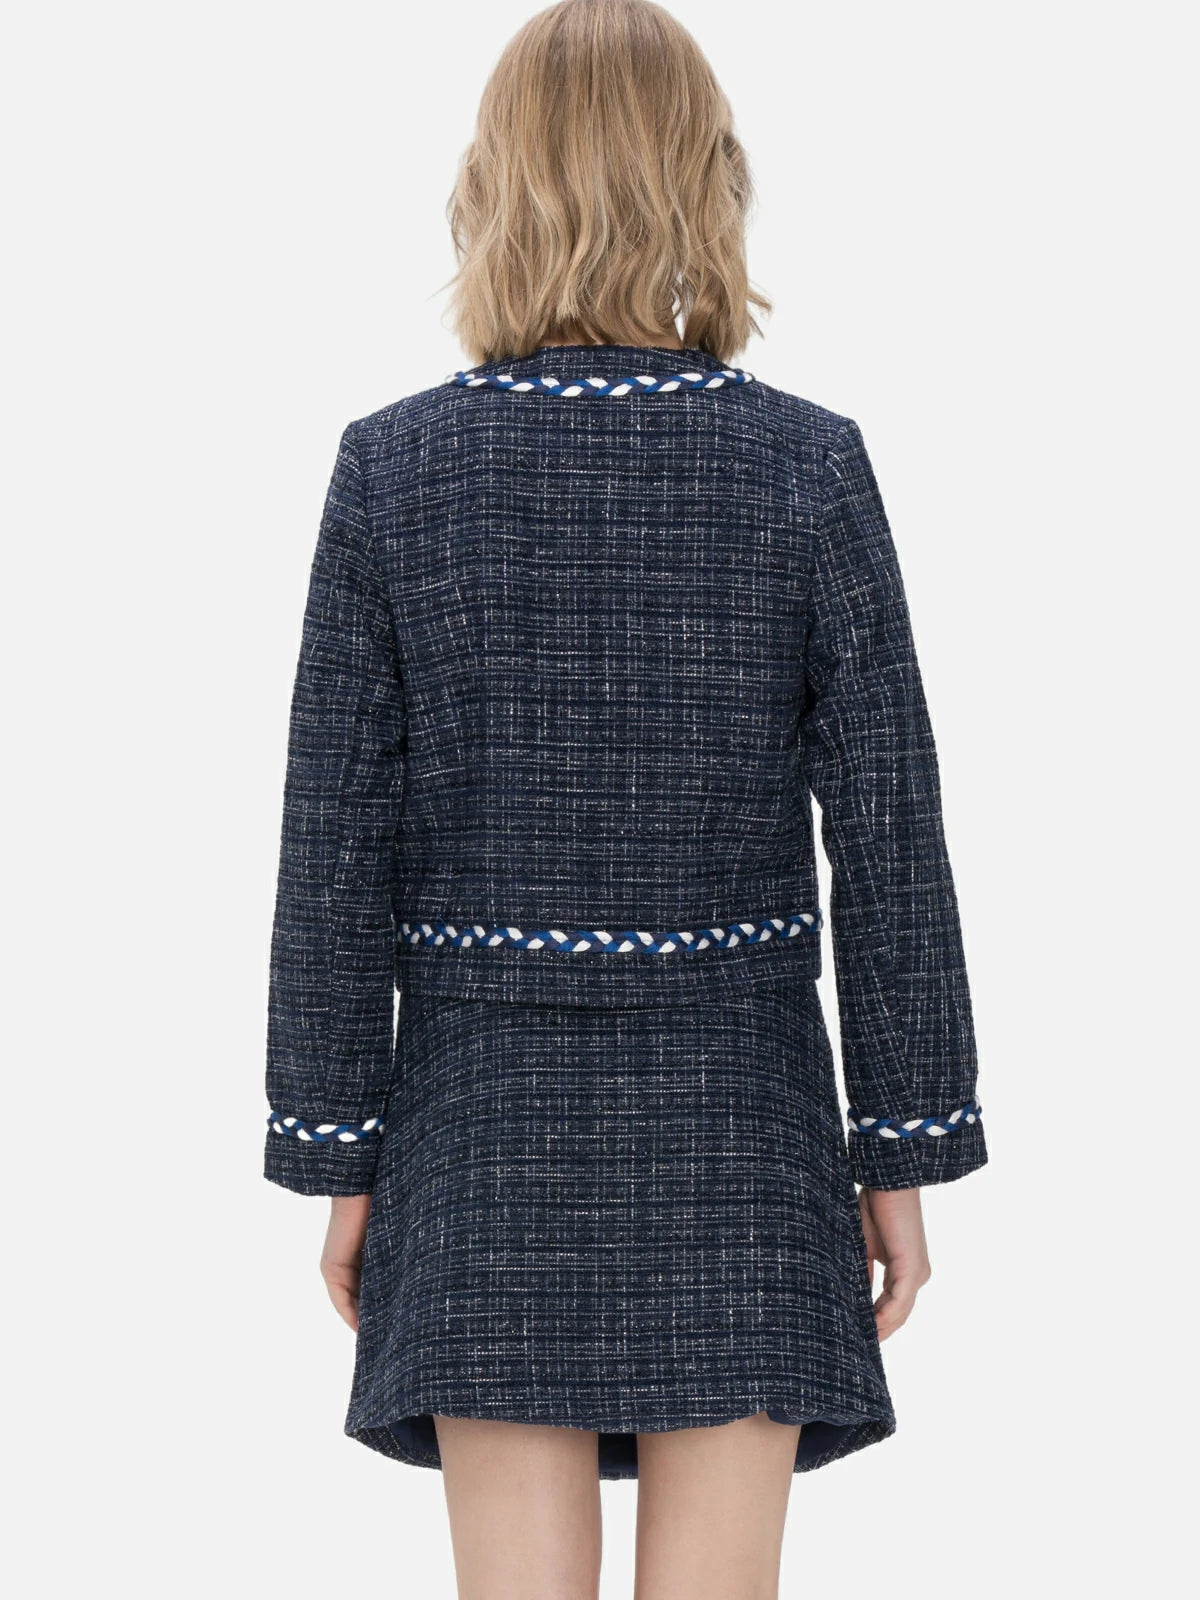 Embrace sophistication in this navy blue plaid jacket adorned with camellia-shaped buttons, offering a classic and elegant look tailored to showcase the feminine silhouette.